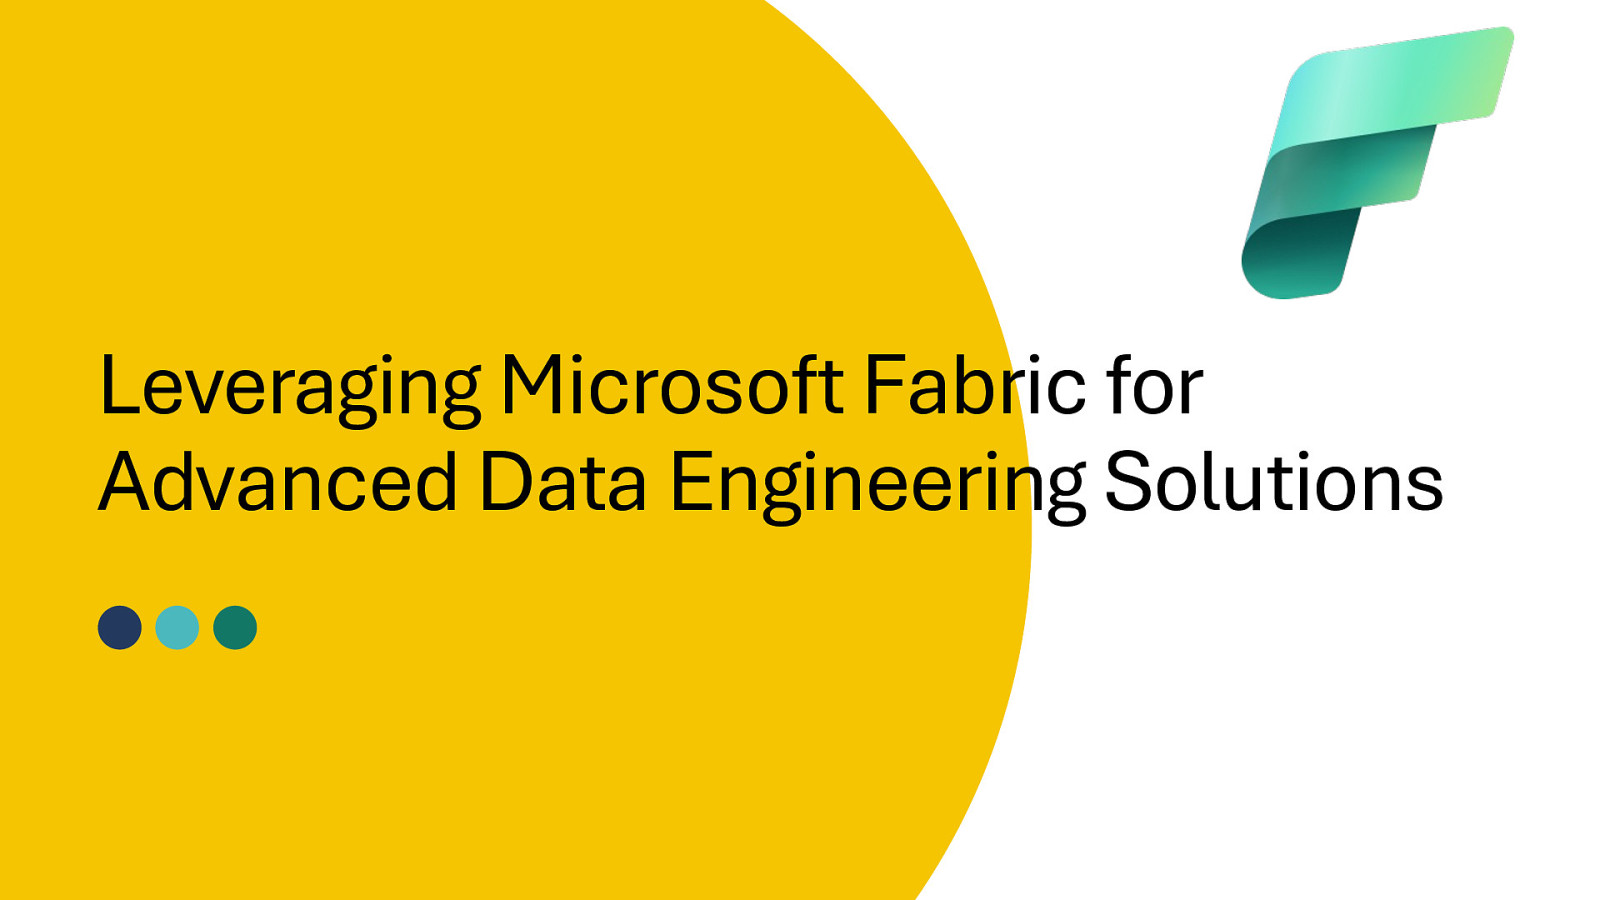 Leveraging Microsoft Fabric for Advanced Data Engineering Solutions by Philip Goldman